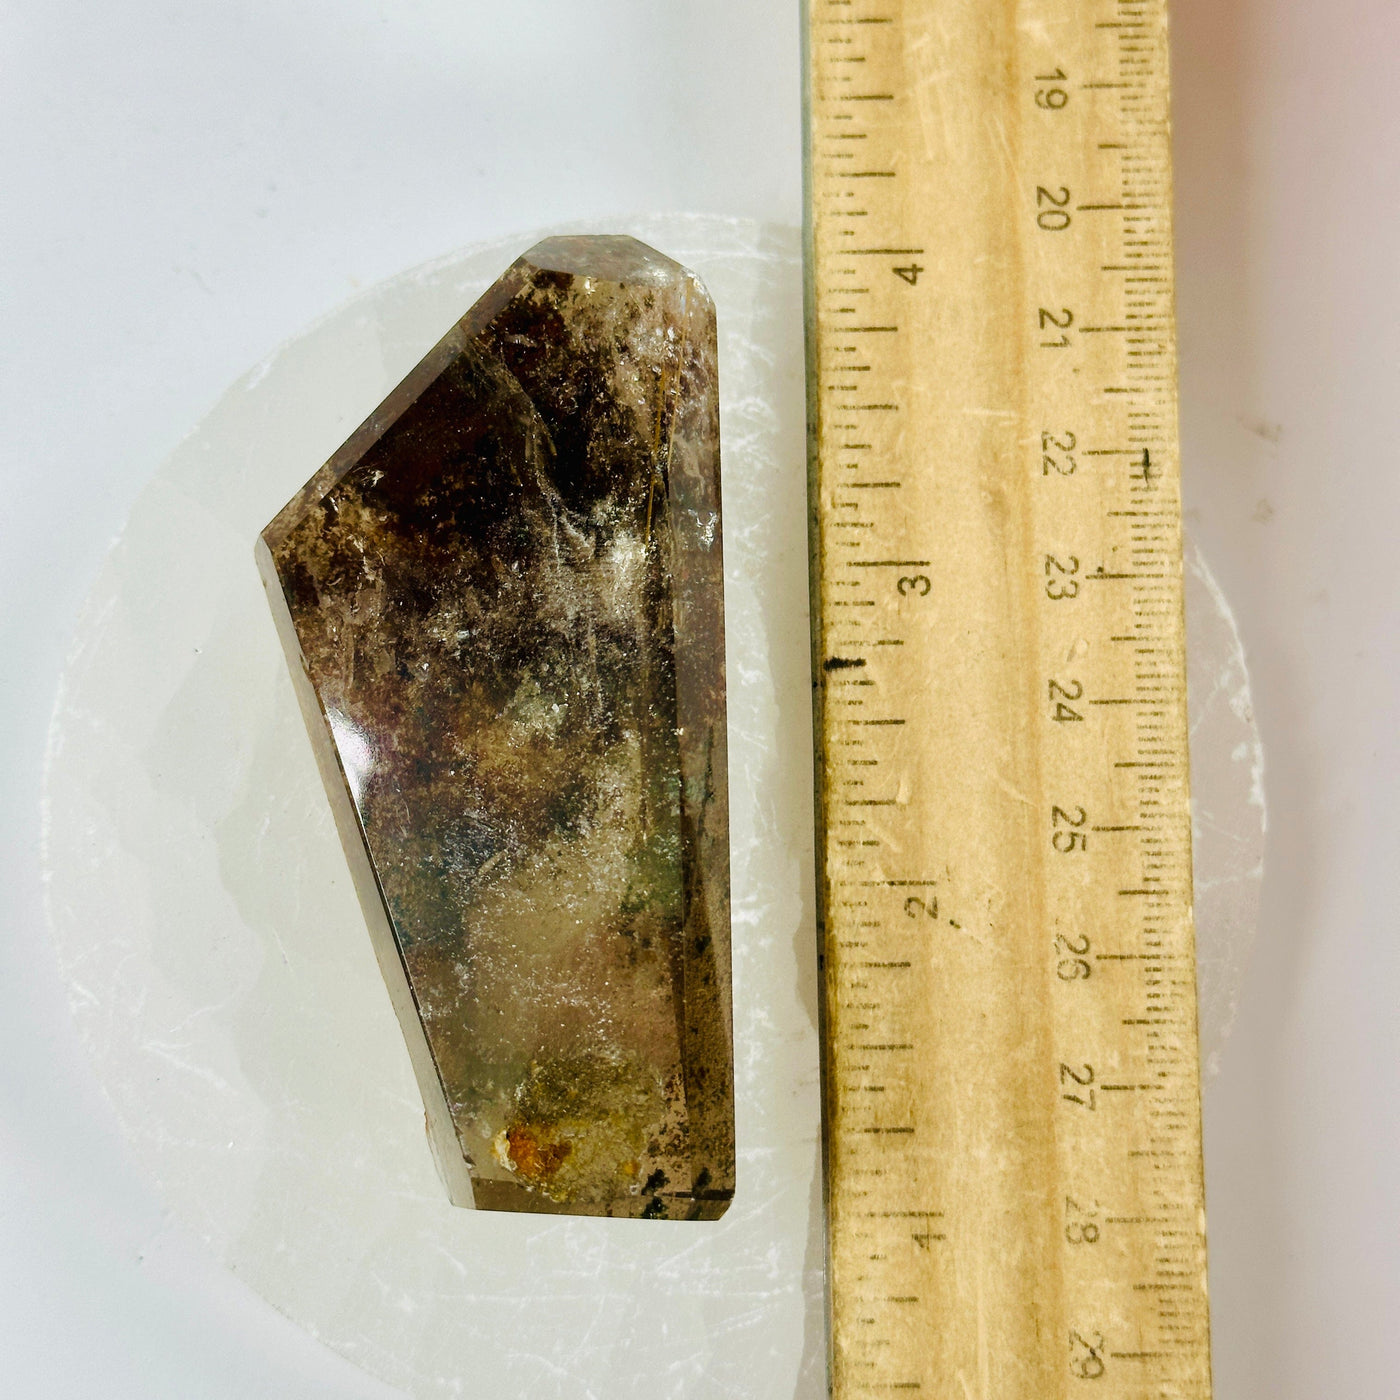 Smokey Quartz Crystal with Rutile Inclusions Polished Freeform - OOAK front view next to ruler for size reference